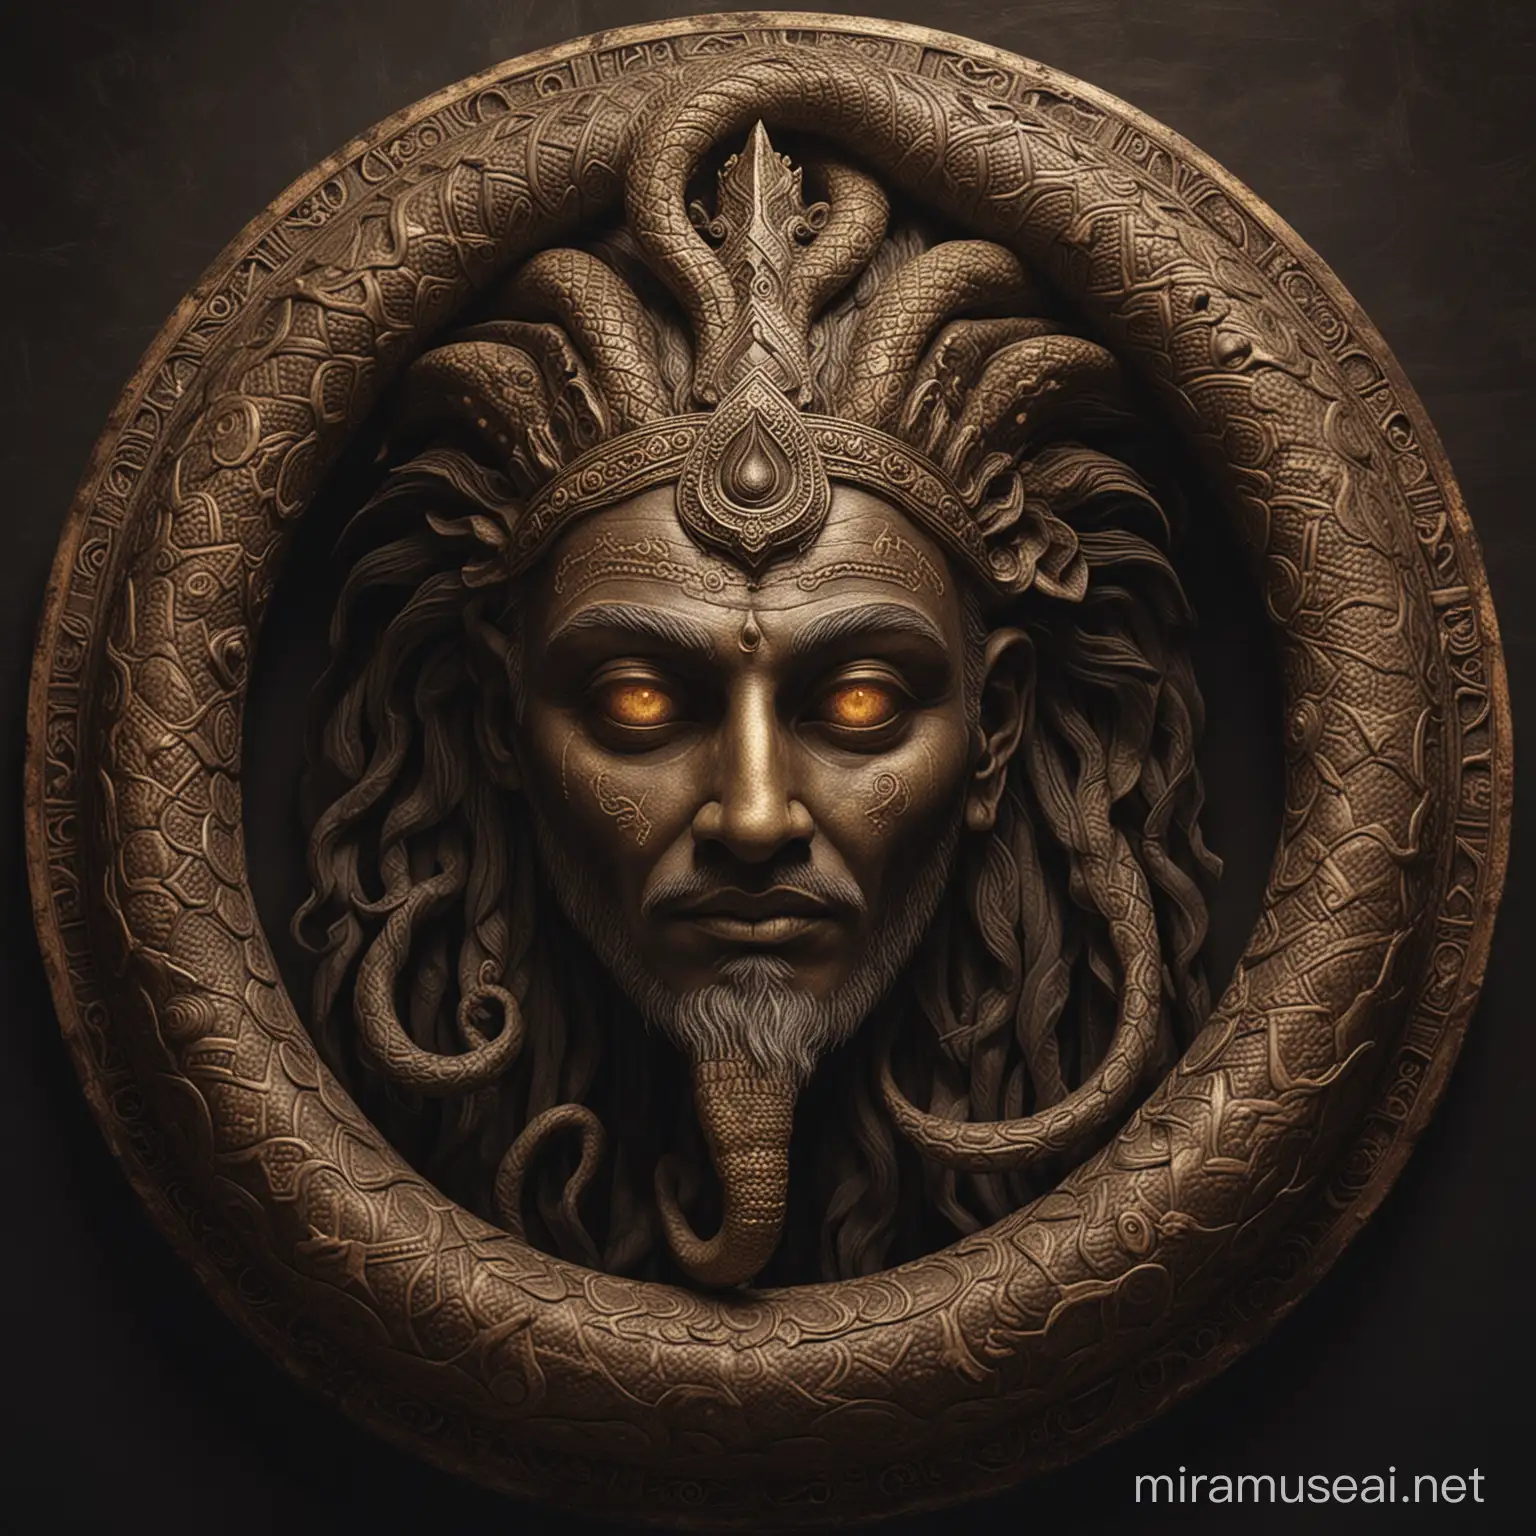 Rahu: A shadowy figure shrouded in mystery, depicted with a serpent's body and a human head. Its presence signifies illusions, desires, and worldly attachments in Vedic astrology.